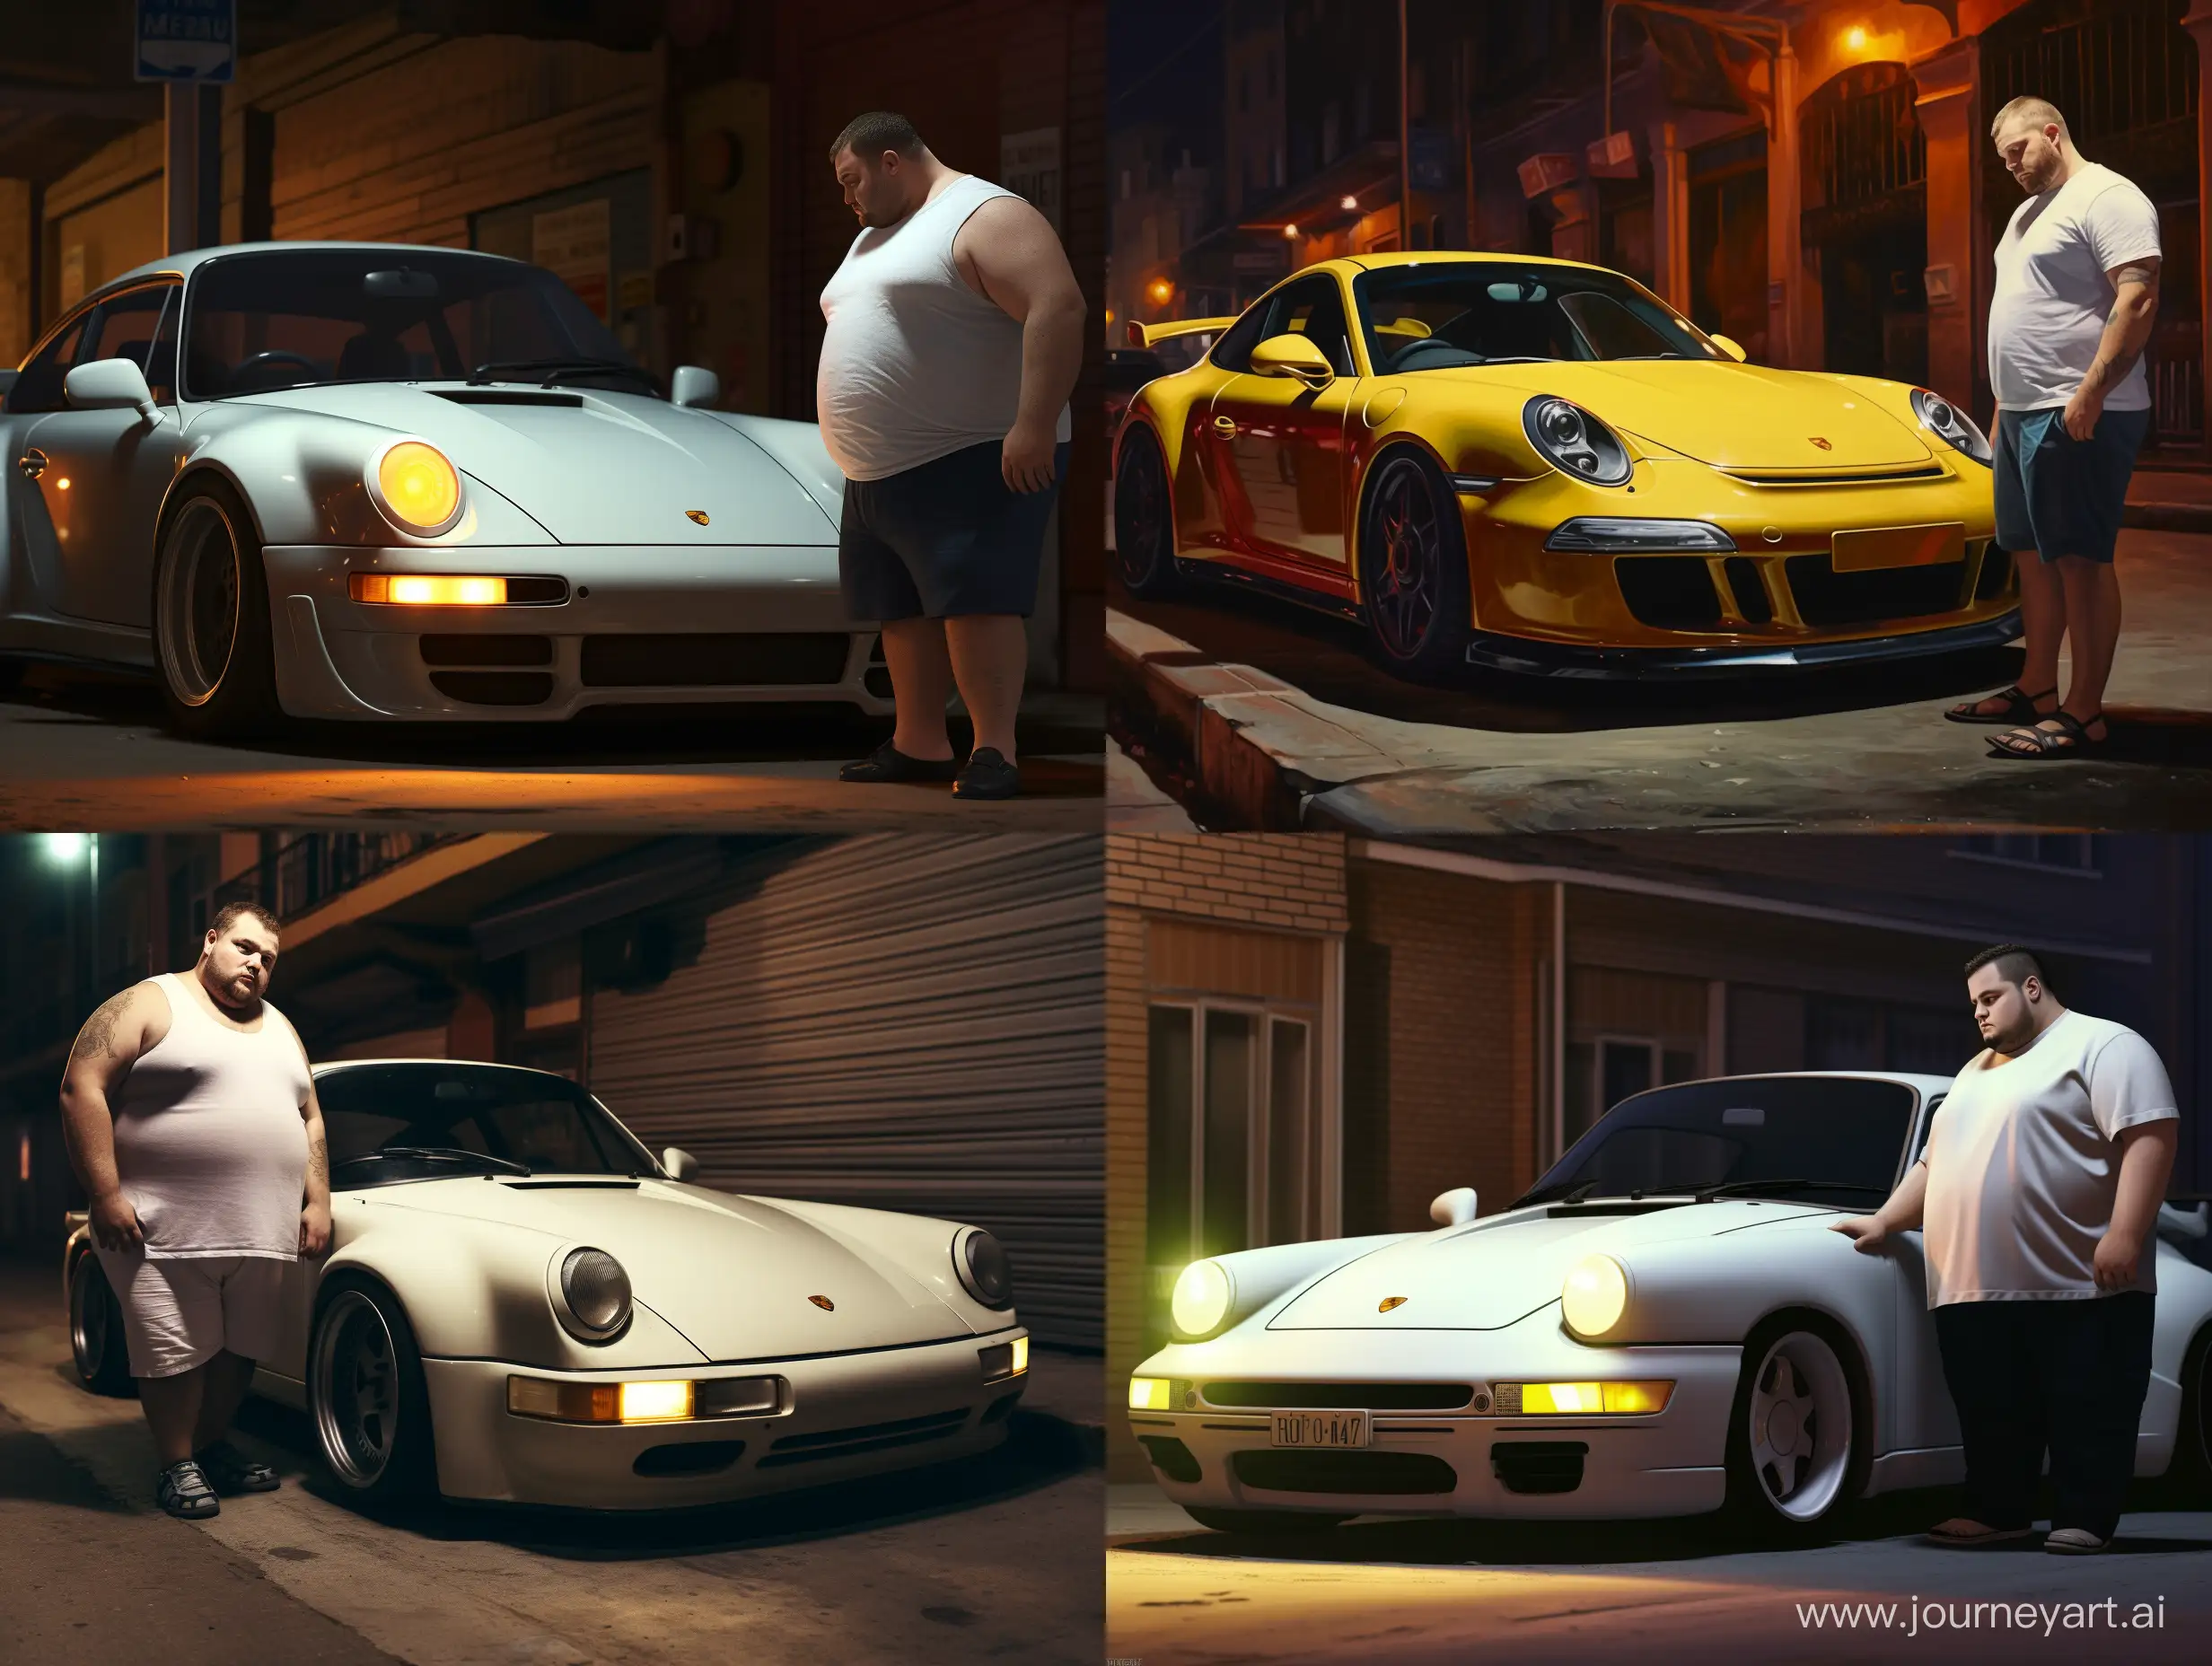 A young fat guy is standing next to an old model of a white porsche. The yellow halogen headlights of this car shine brightly. The action takes place on a dark street in a residential area of an Eastern European city